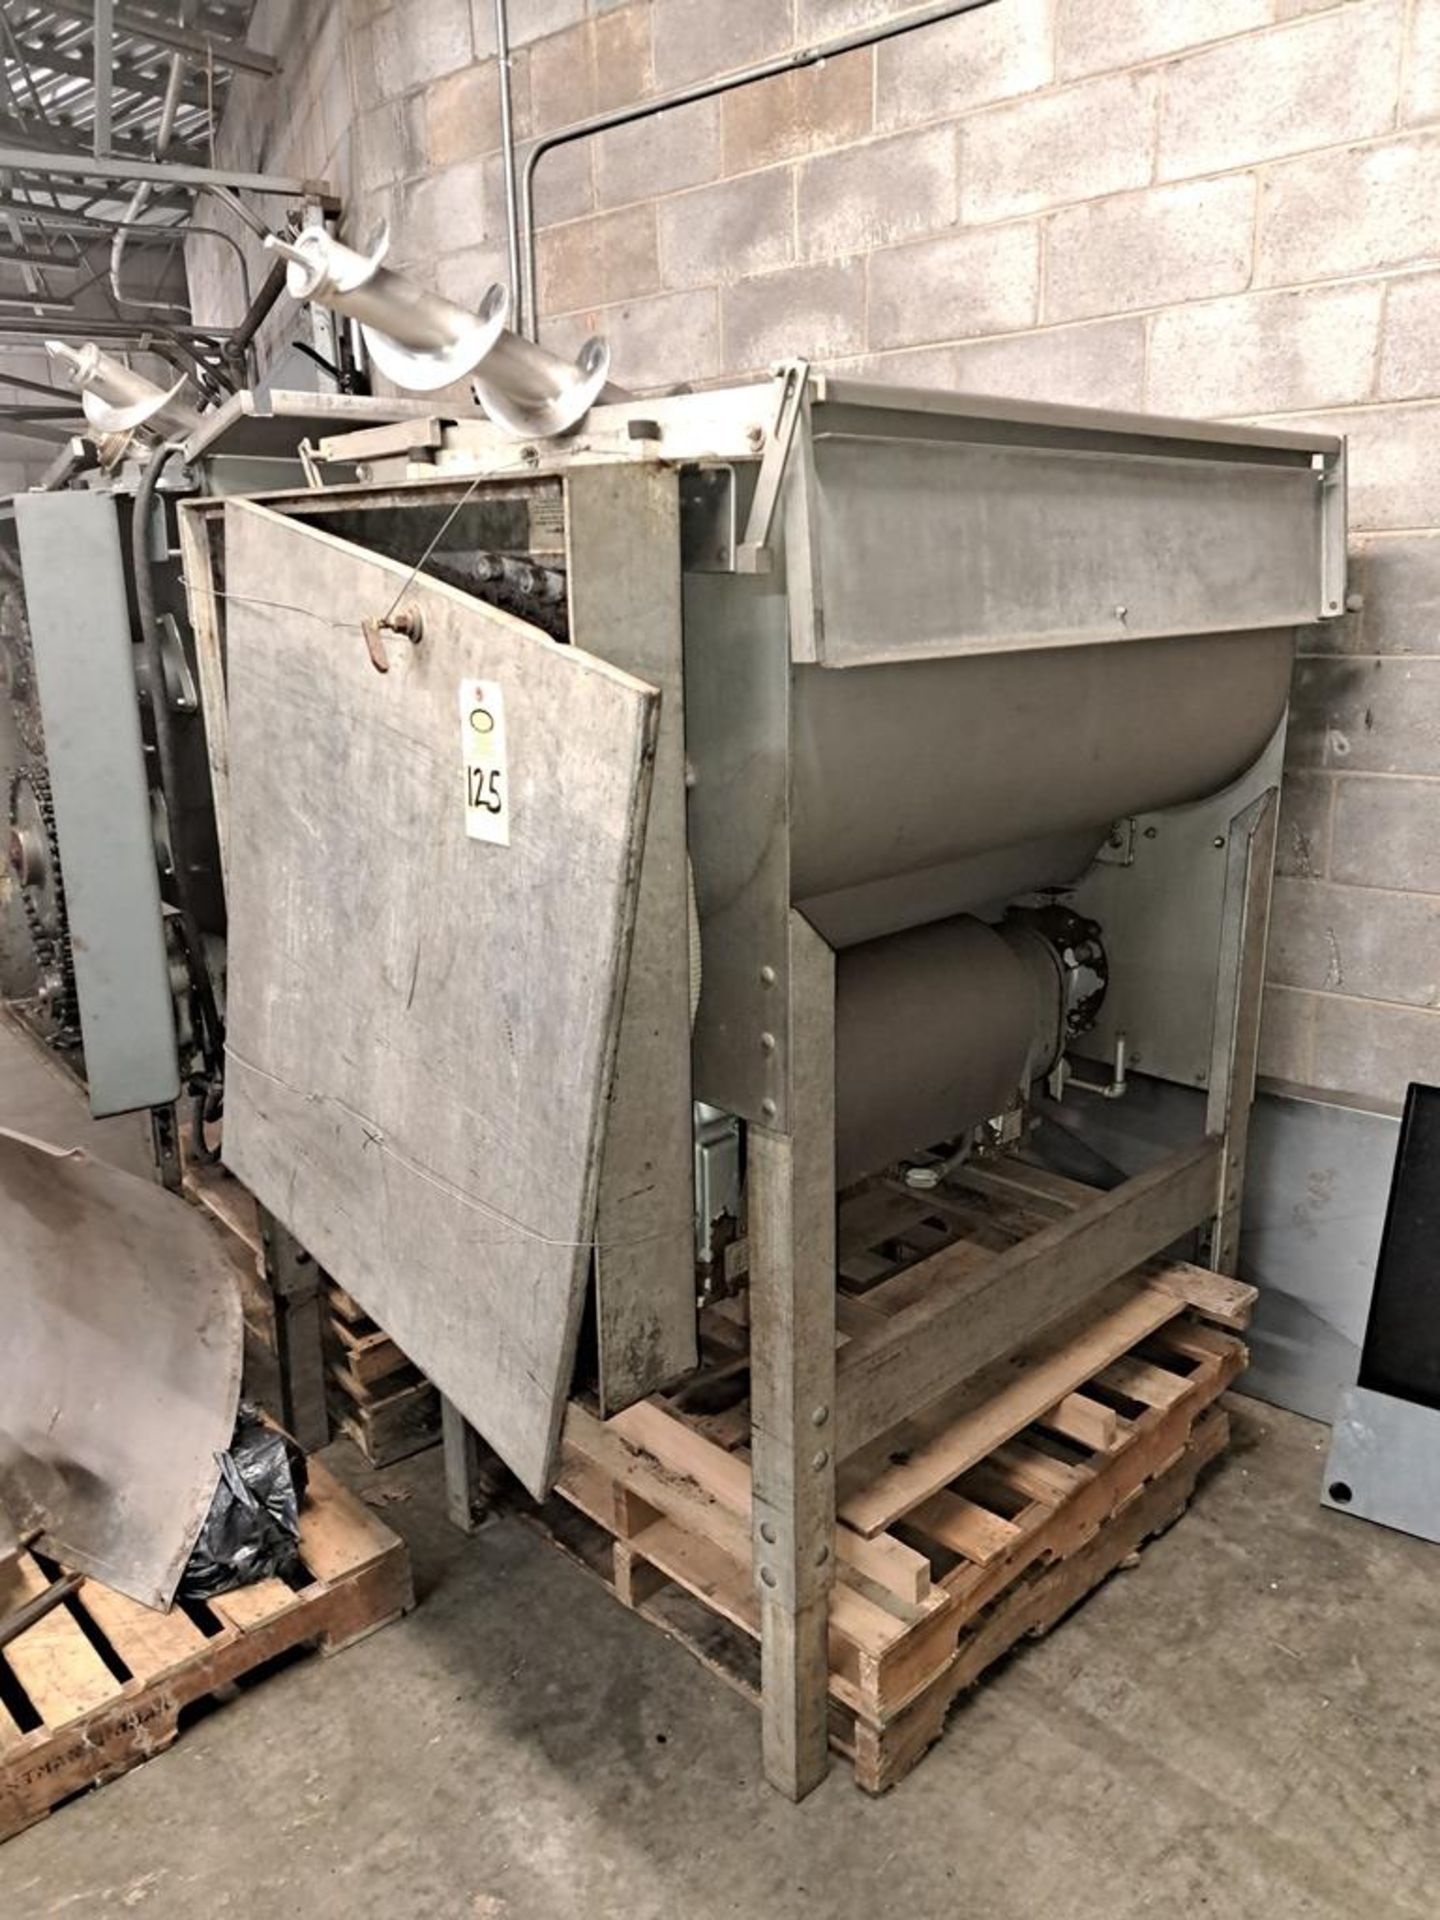 Hobart Mdl. 4356 Mixer/Grinder, incomplete parts machine (Required Loading Fee $200.00 Rigger: